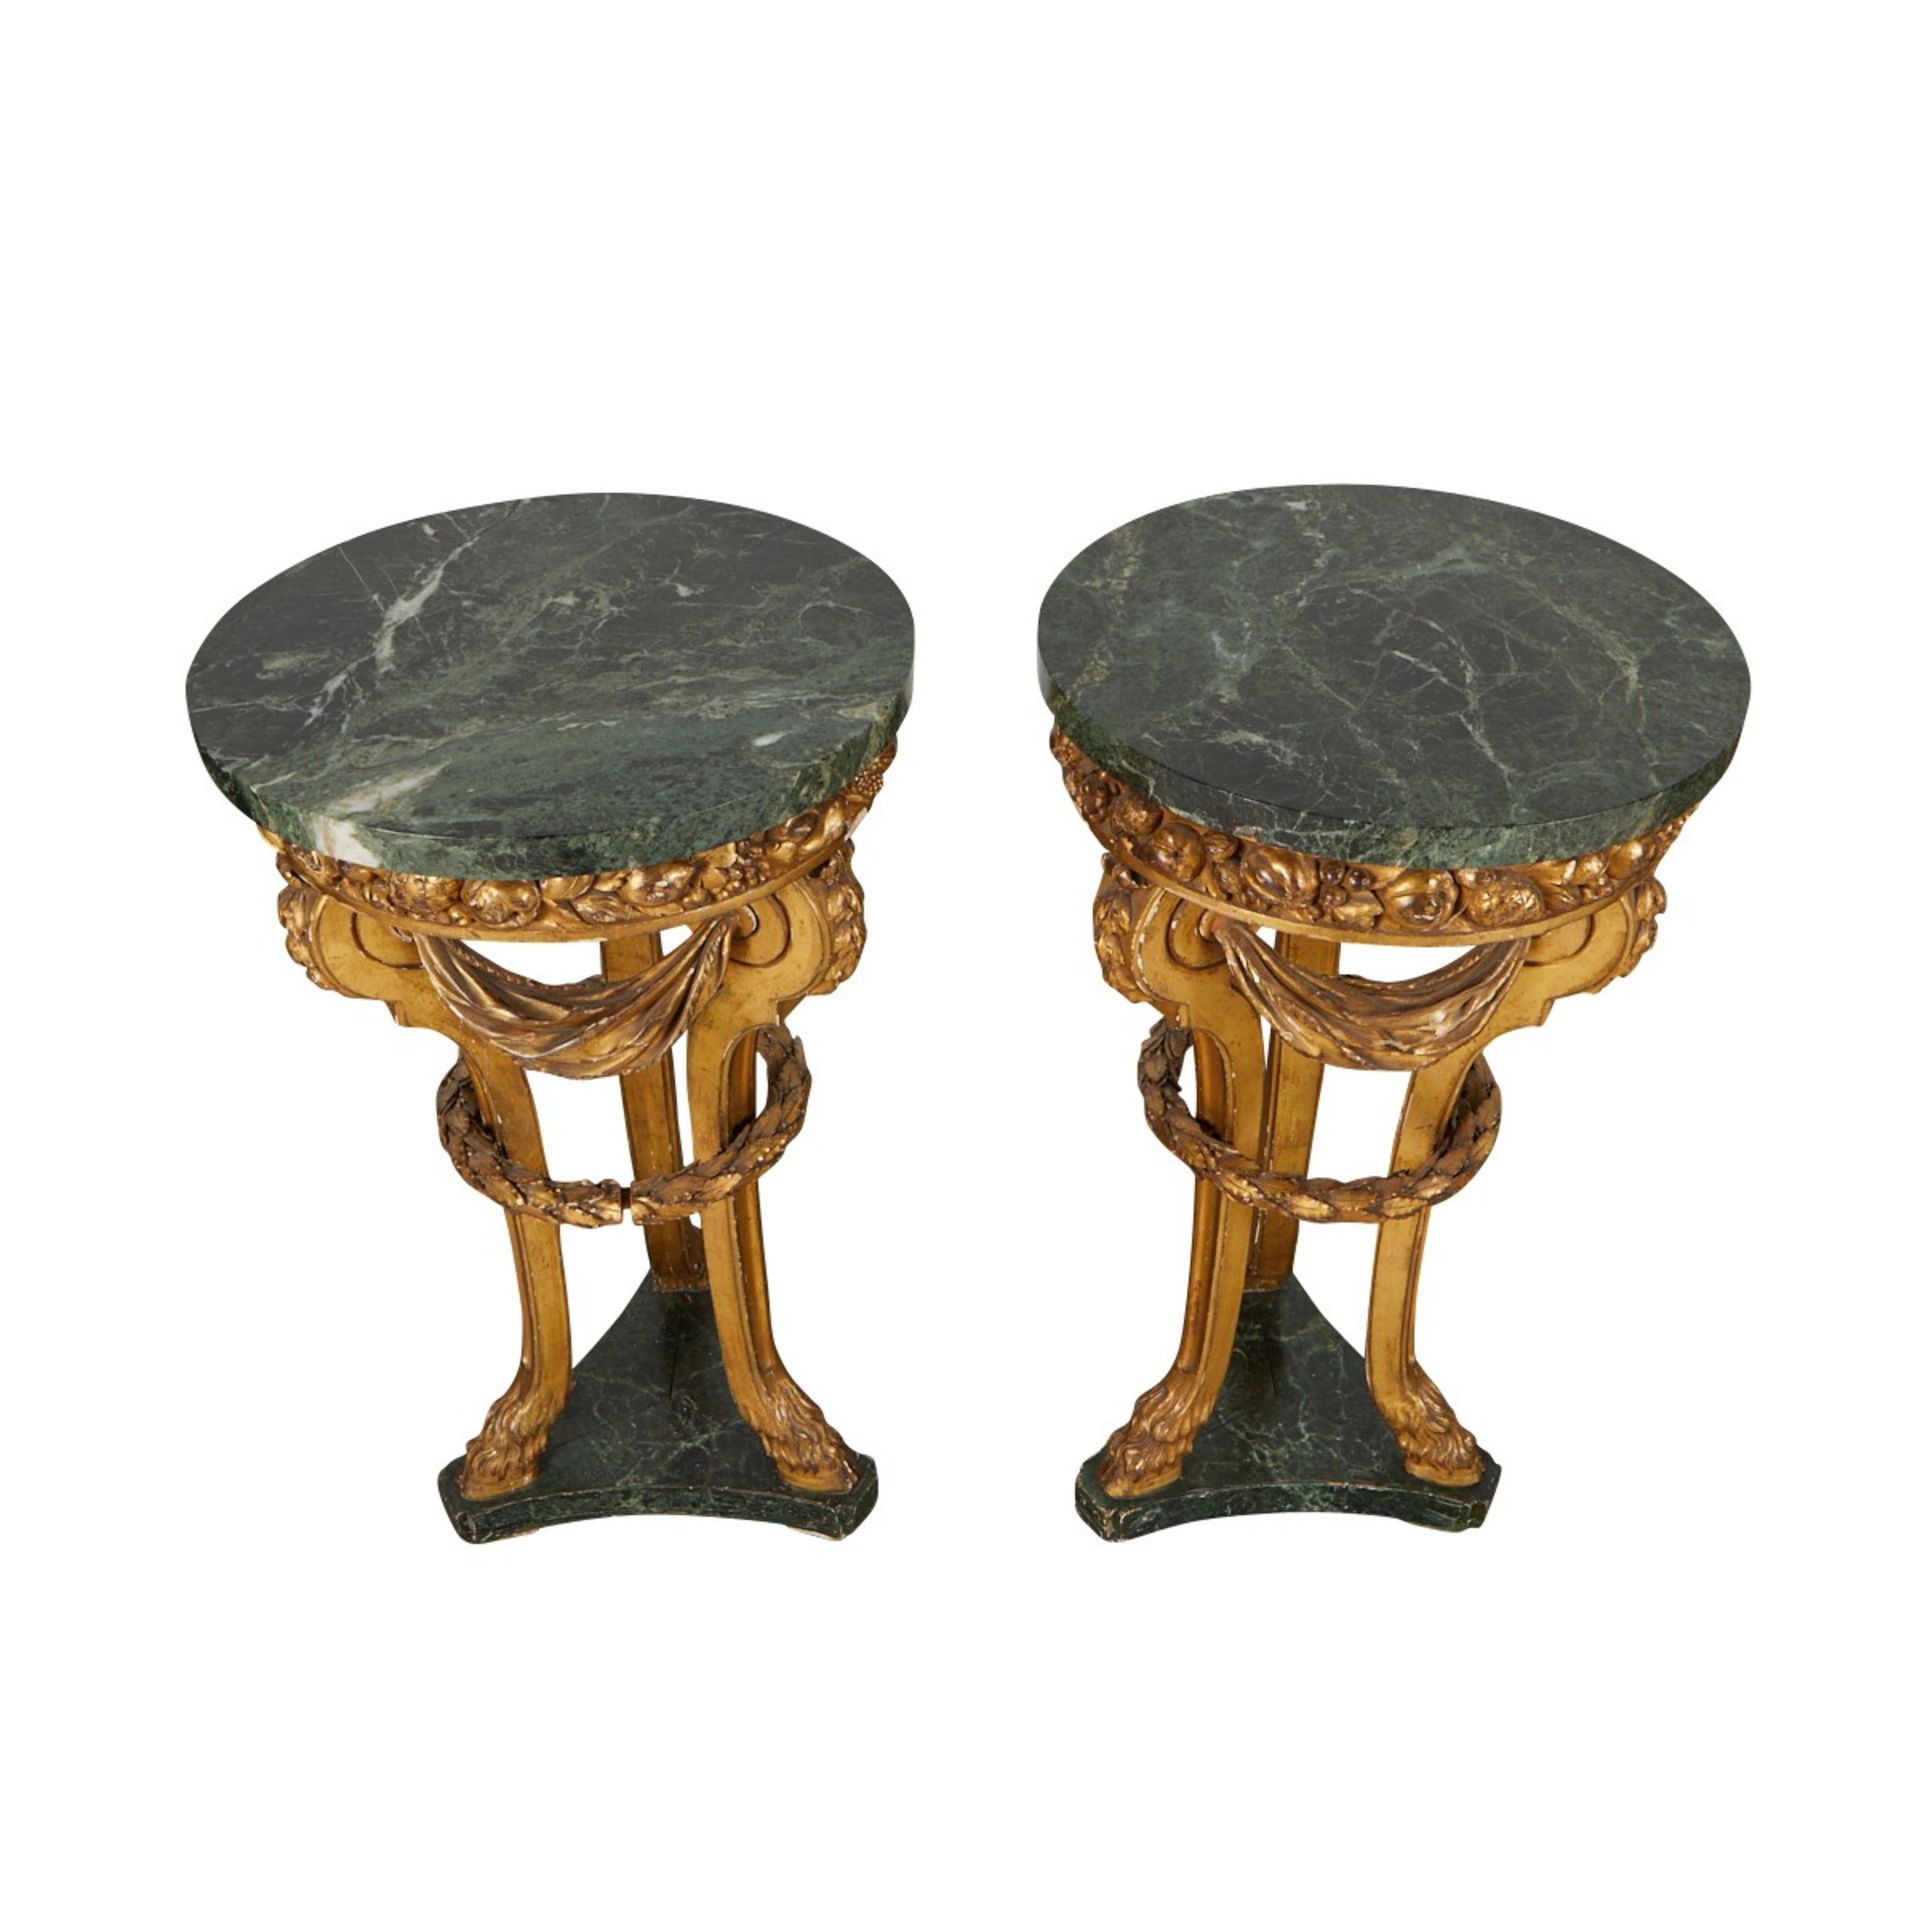 Pair Neoclassical Giltwood Faux Marble Pedestals - Image 6 of 17